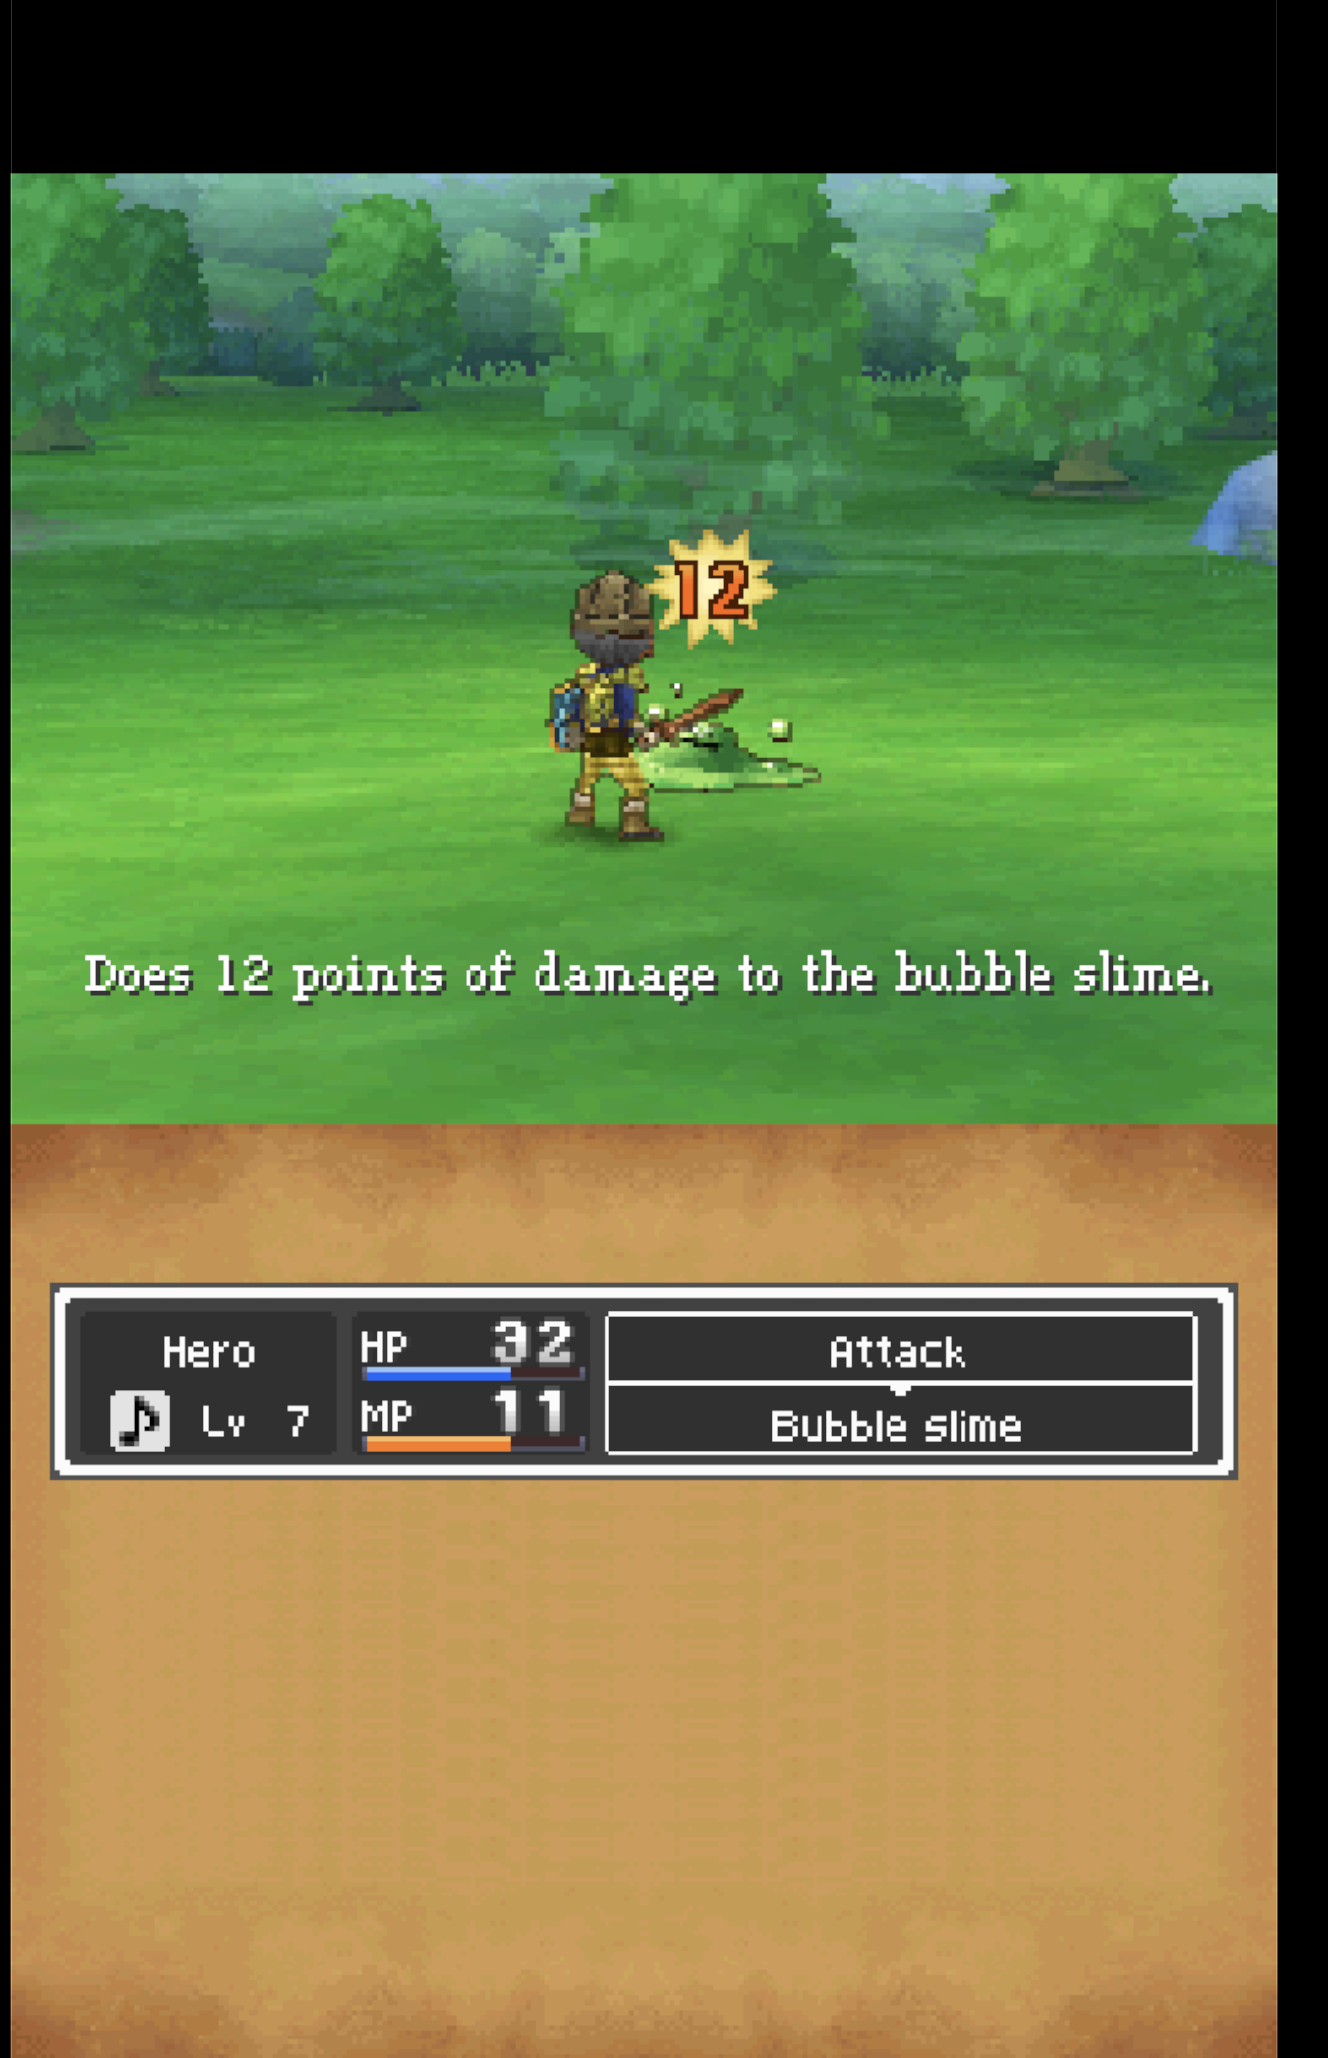 Scene from the Nintendo DS game Dragon Quest IX depicting a split screen with the upper one of the hero character attacking a slime, the lower one the stats of the battle